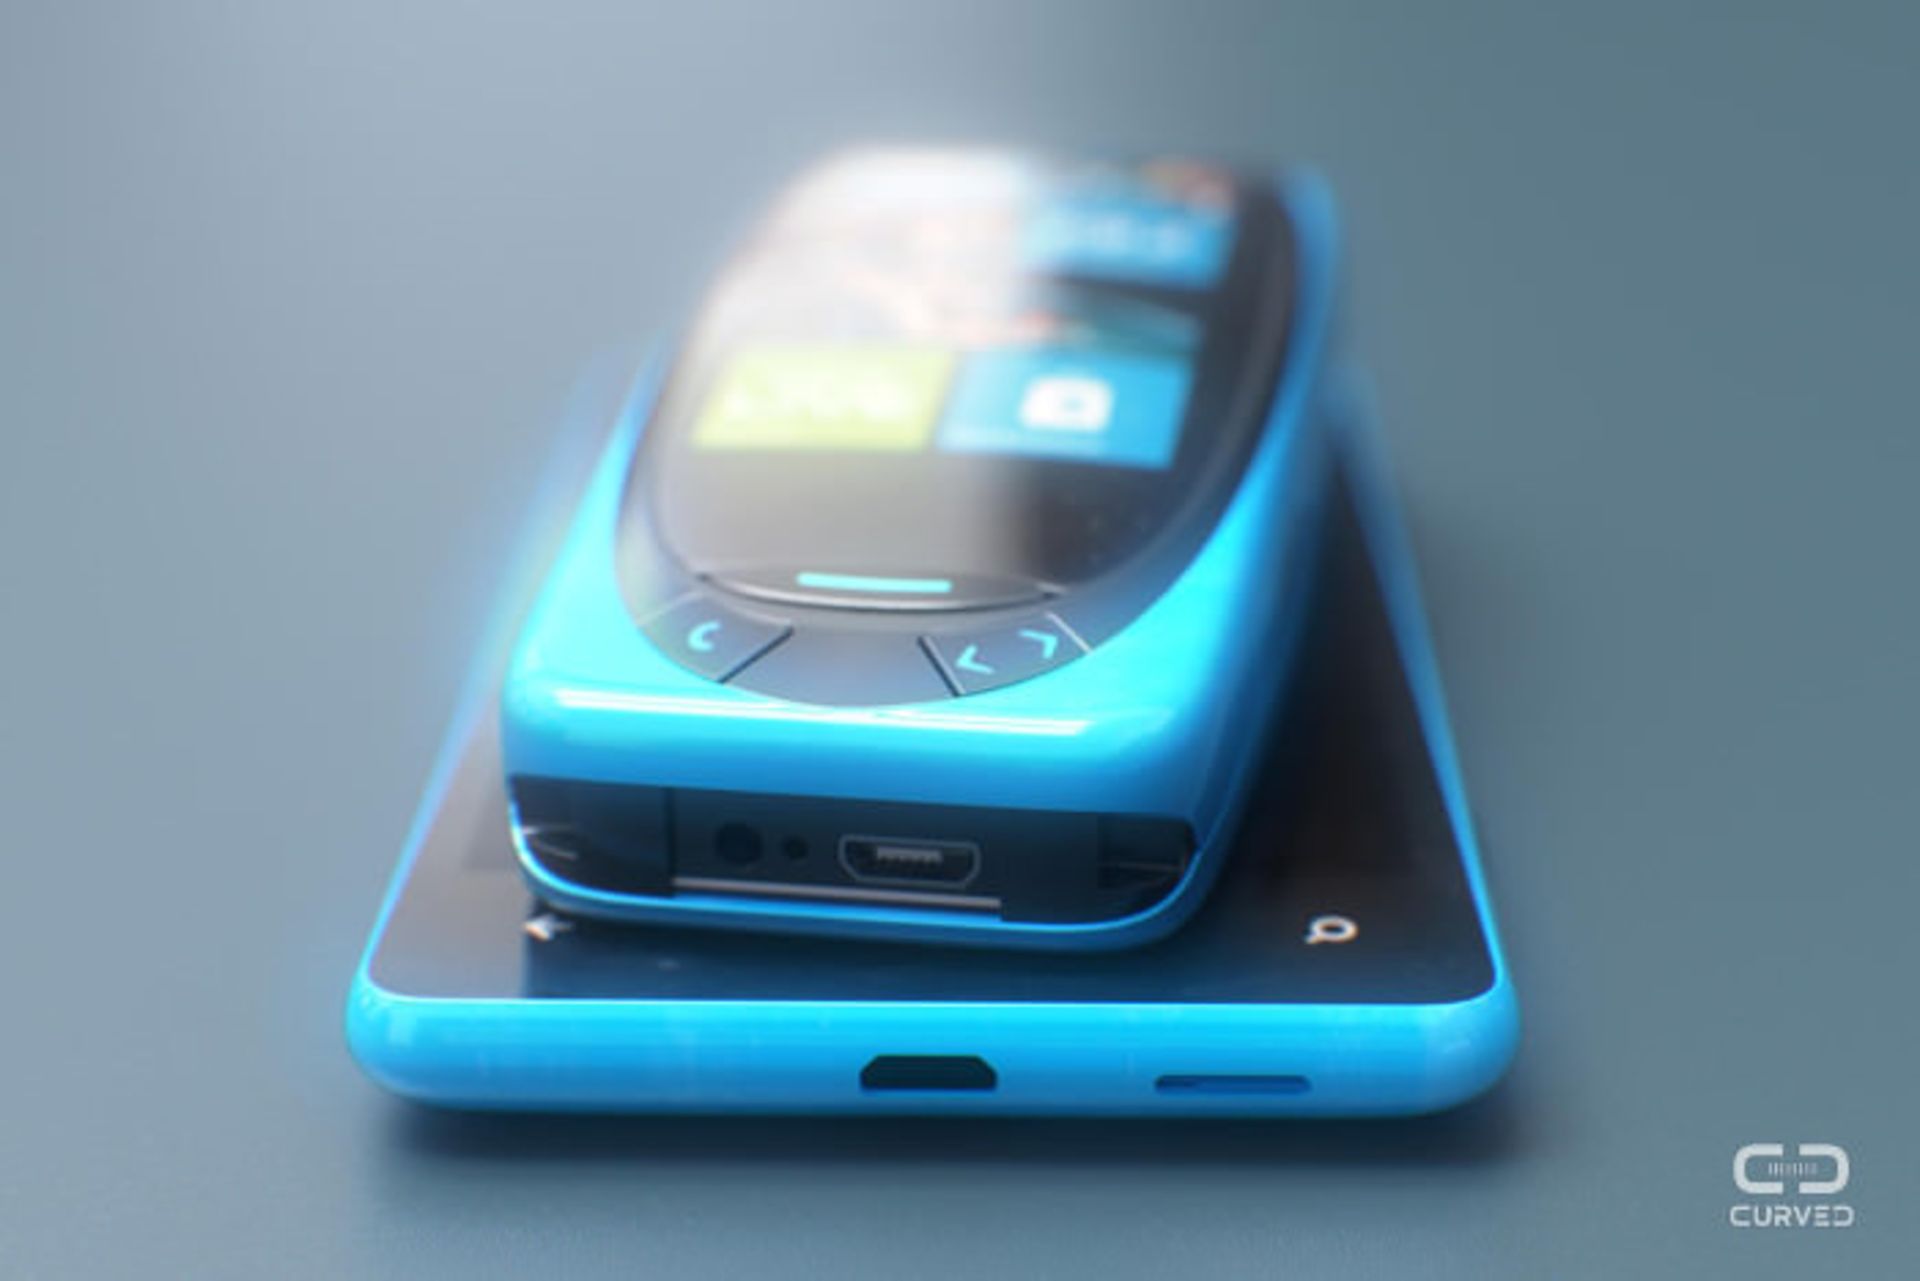 What-if-featurephones-were-smart 13